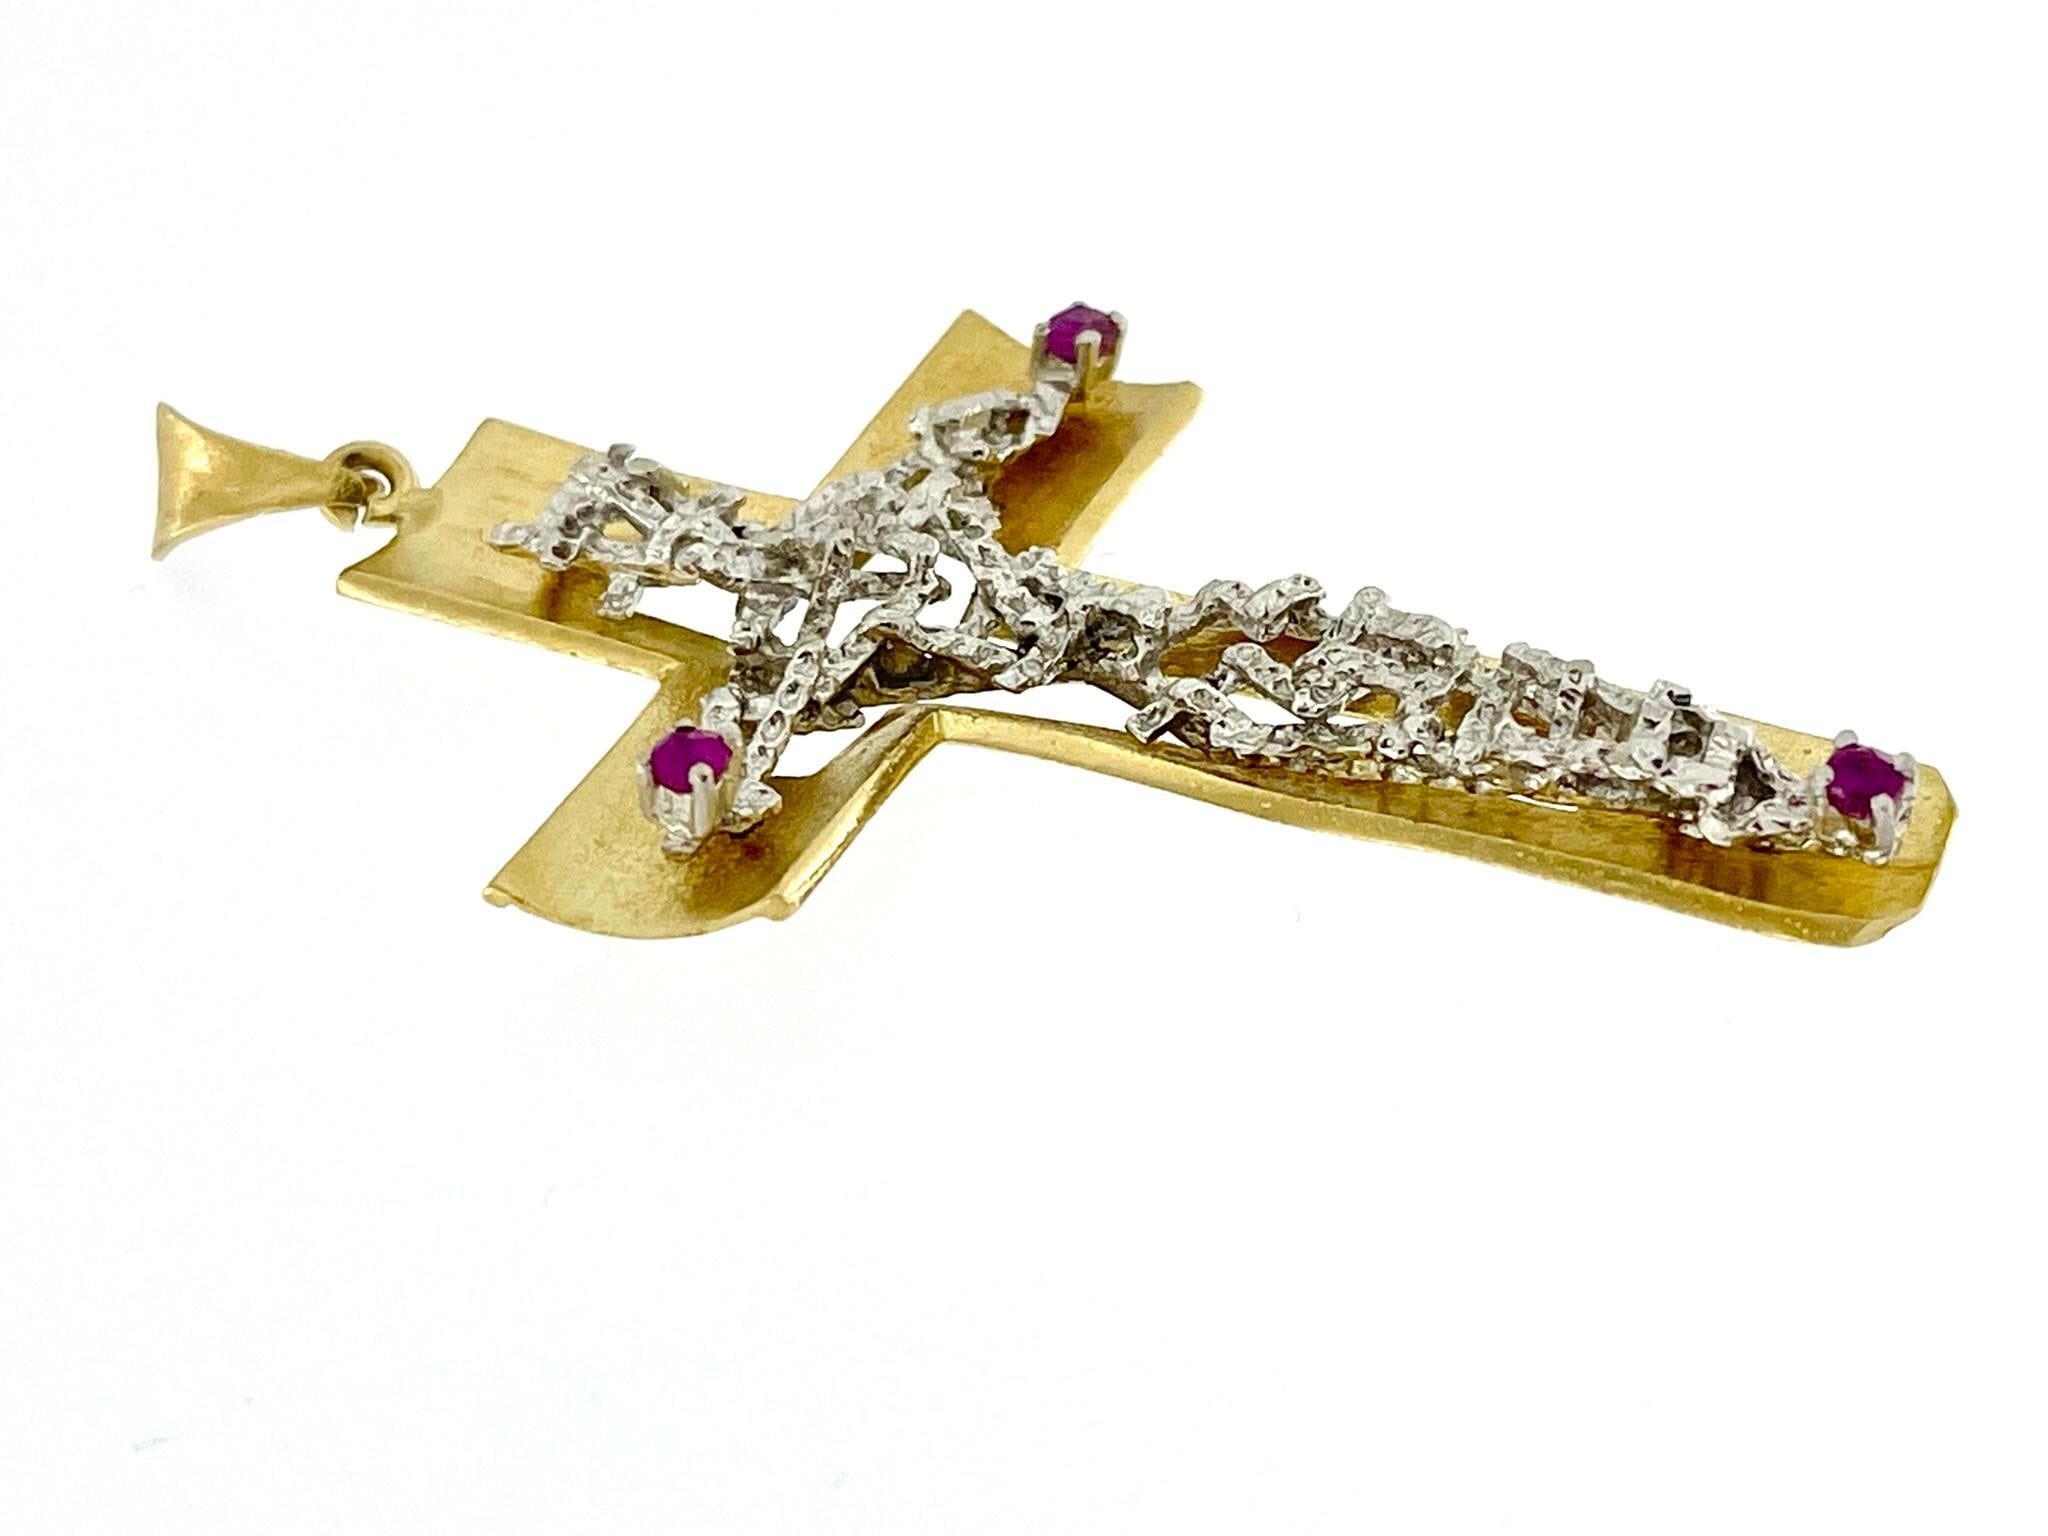 Artisan Hand-Made 18kt Gold Italian Crucifix with Rubies For Sale